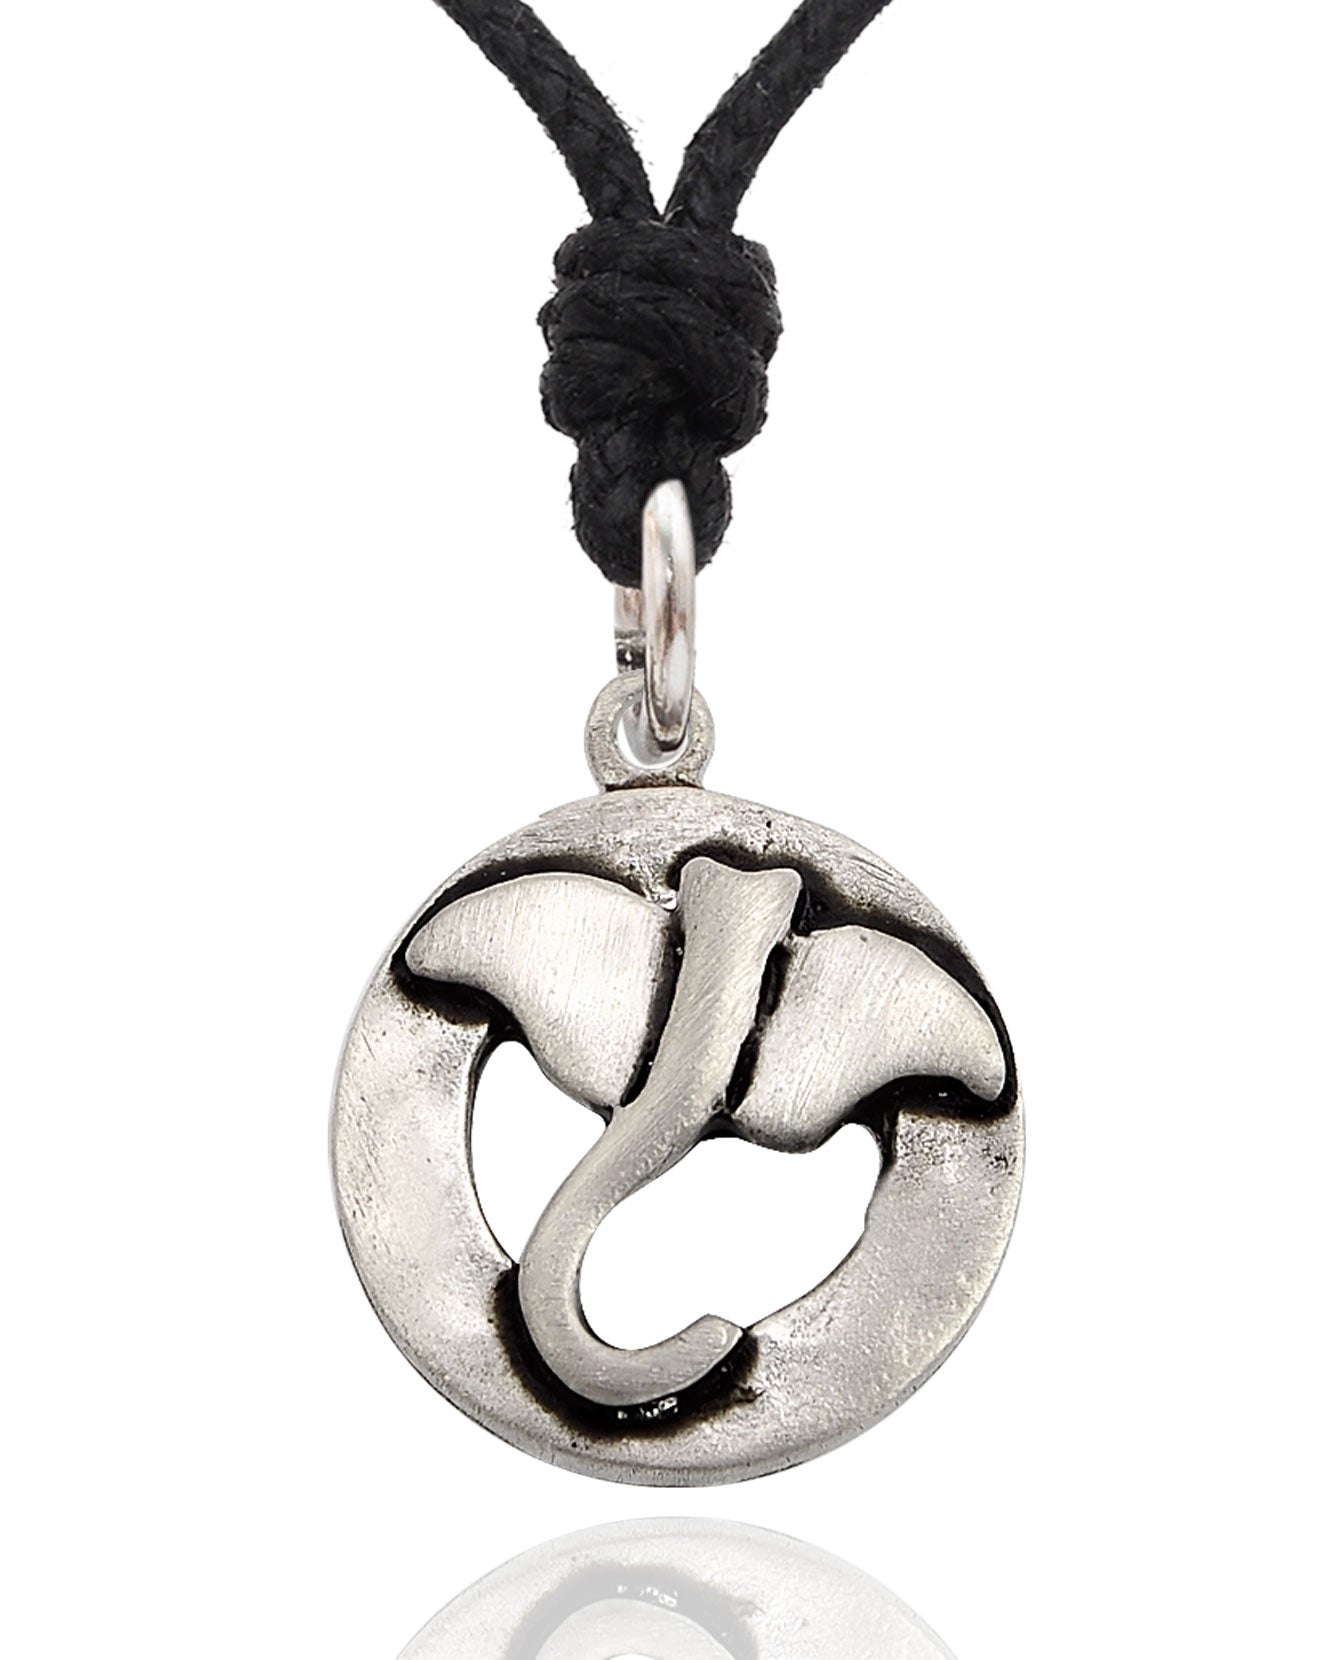 New Stingray Silver Pewter Gold Brass Charm Necklace Pendant Jewelry